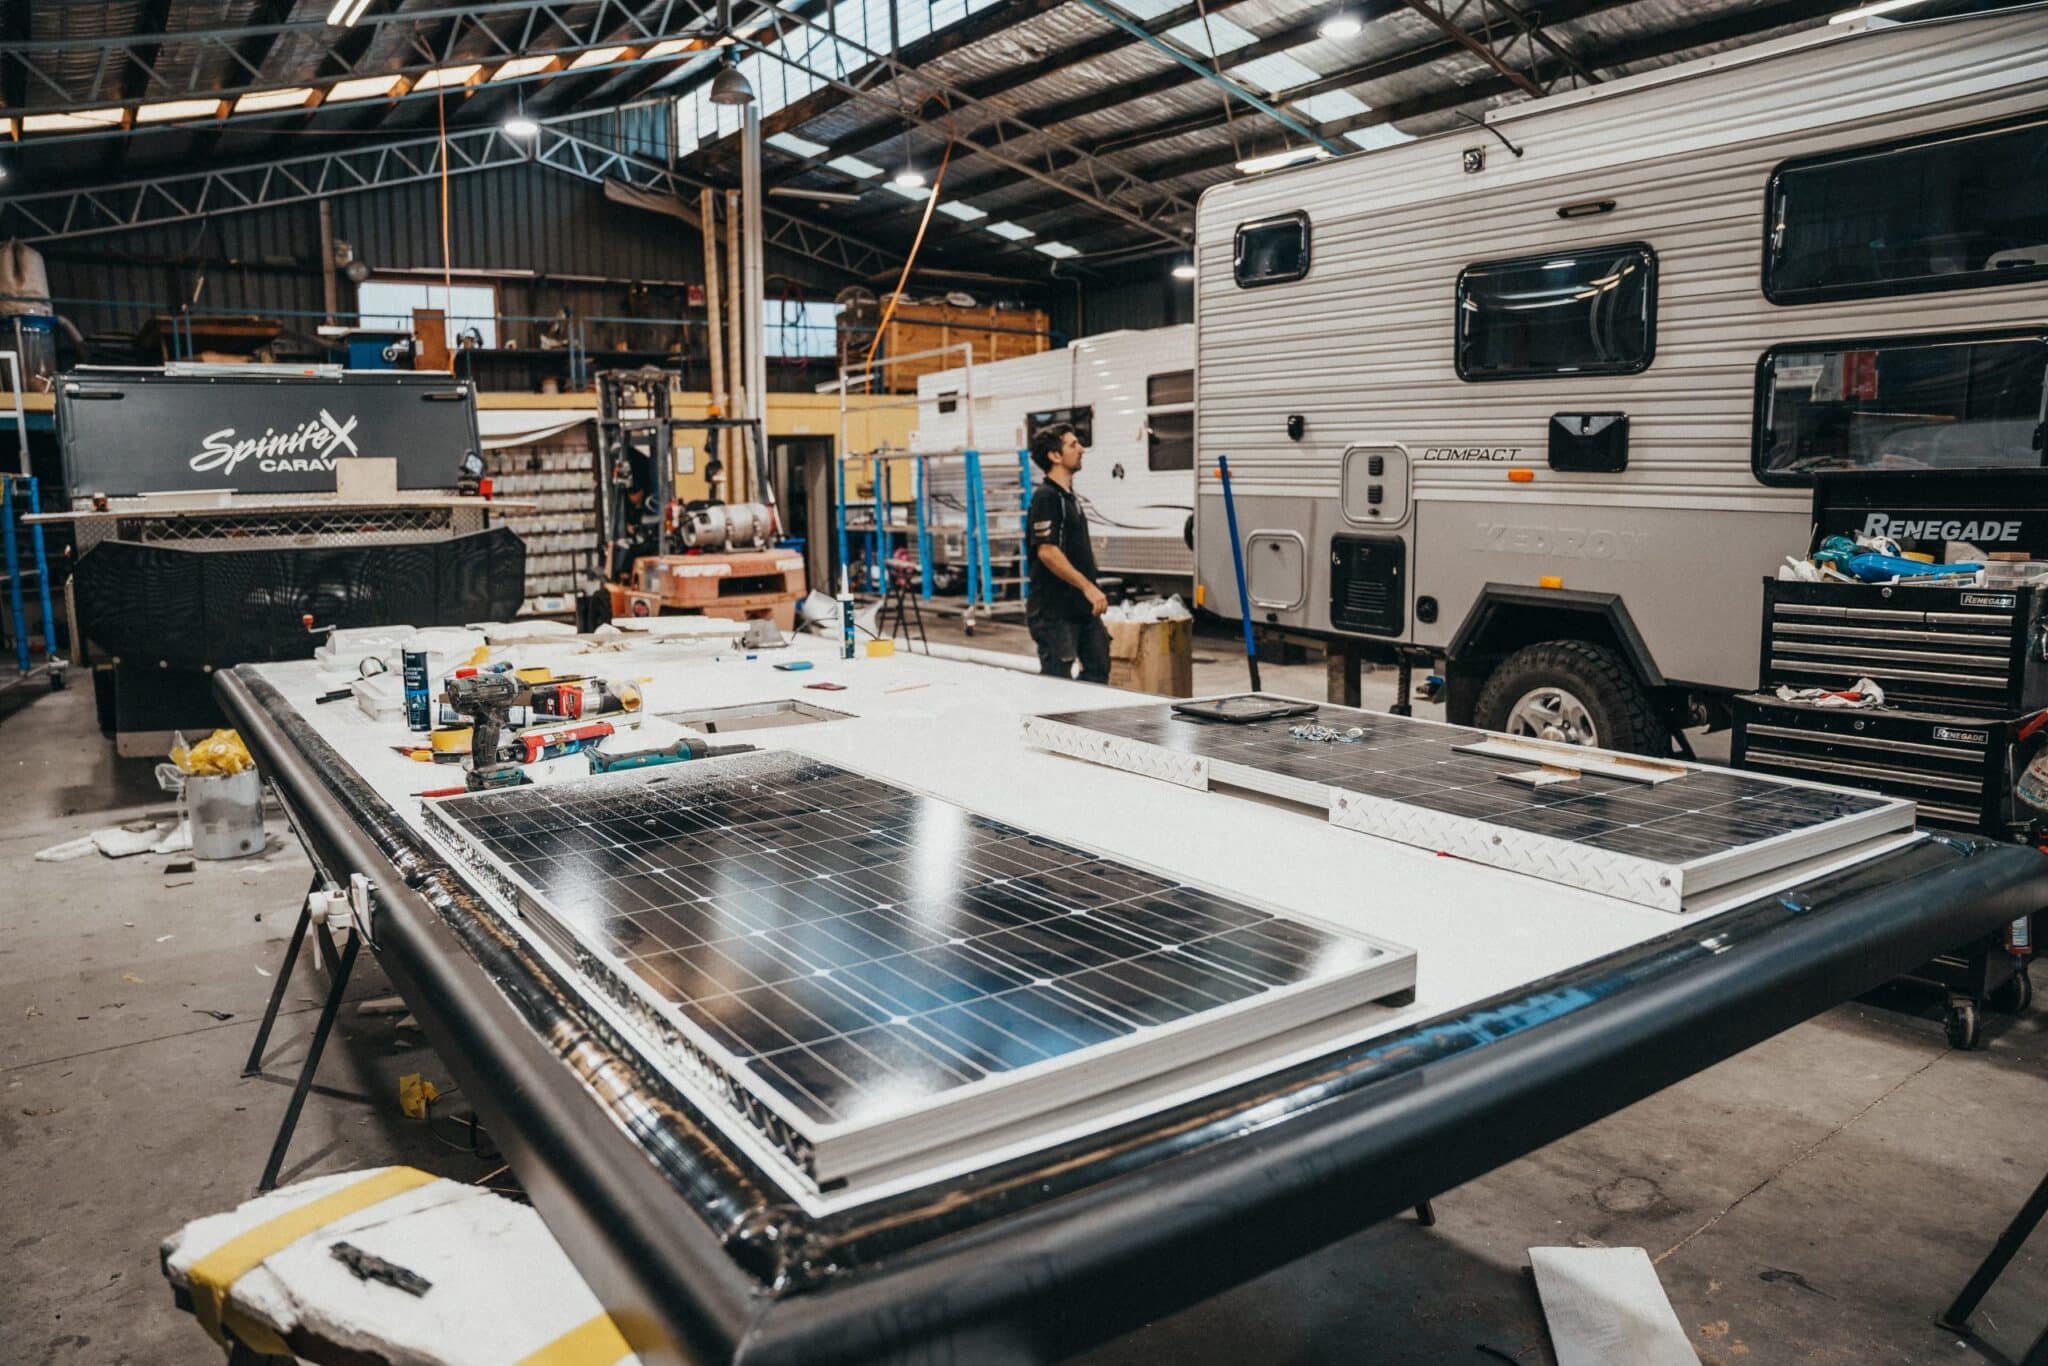 Keeping your caravan energy efficient: Two technicians service and reattach a solar panel for continued power